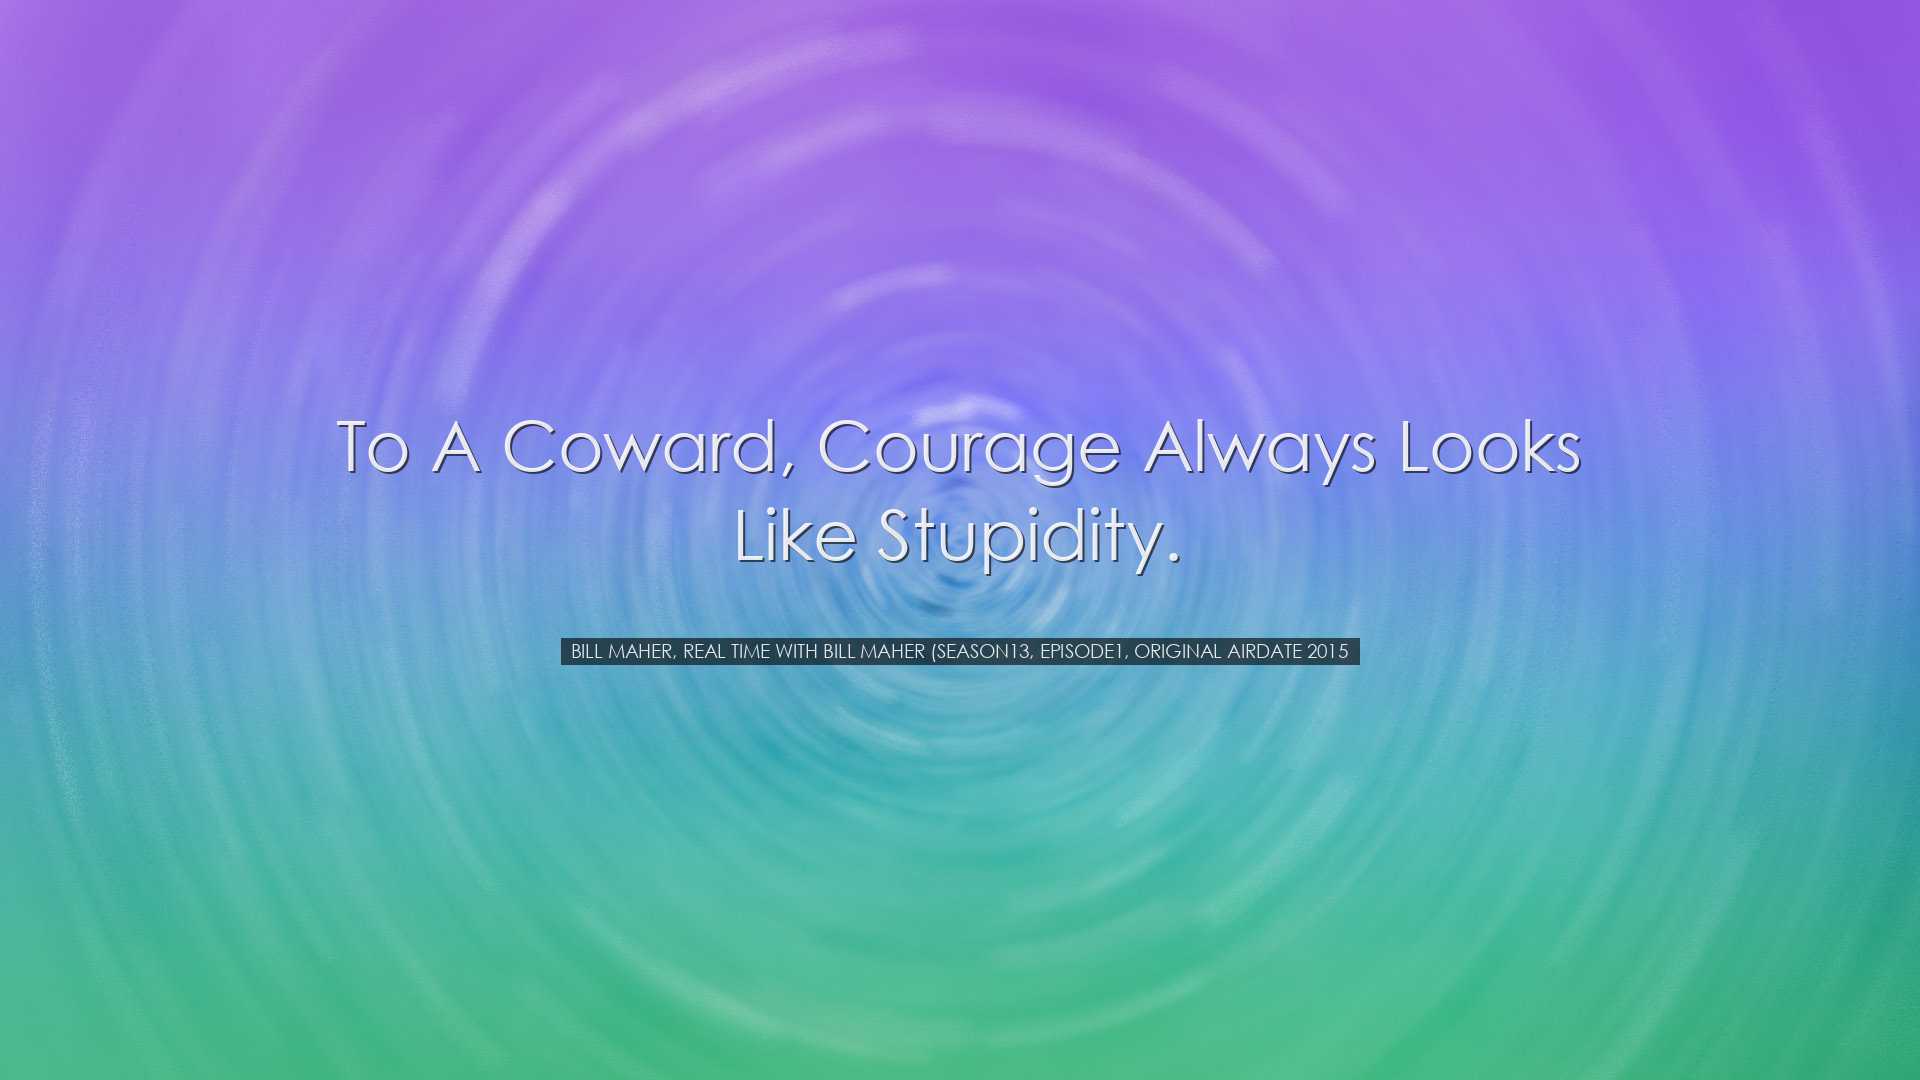 To a coward, courage always looks like stupidity. - Bill Maher, Re